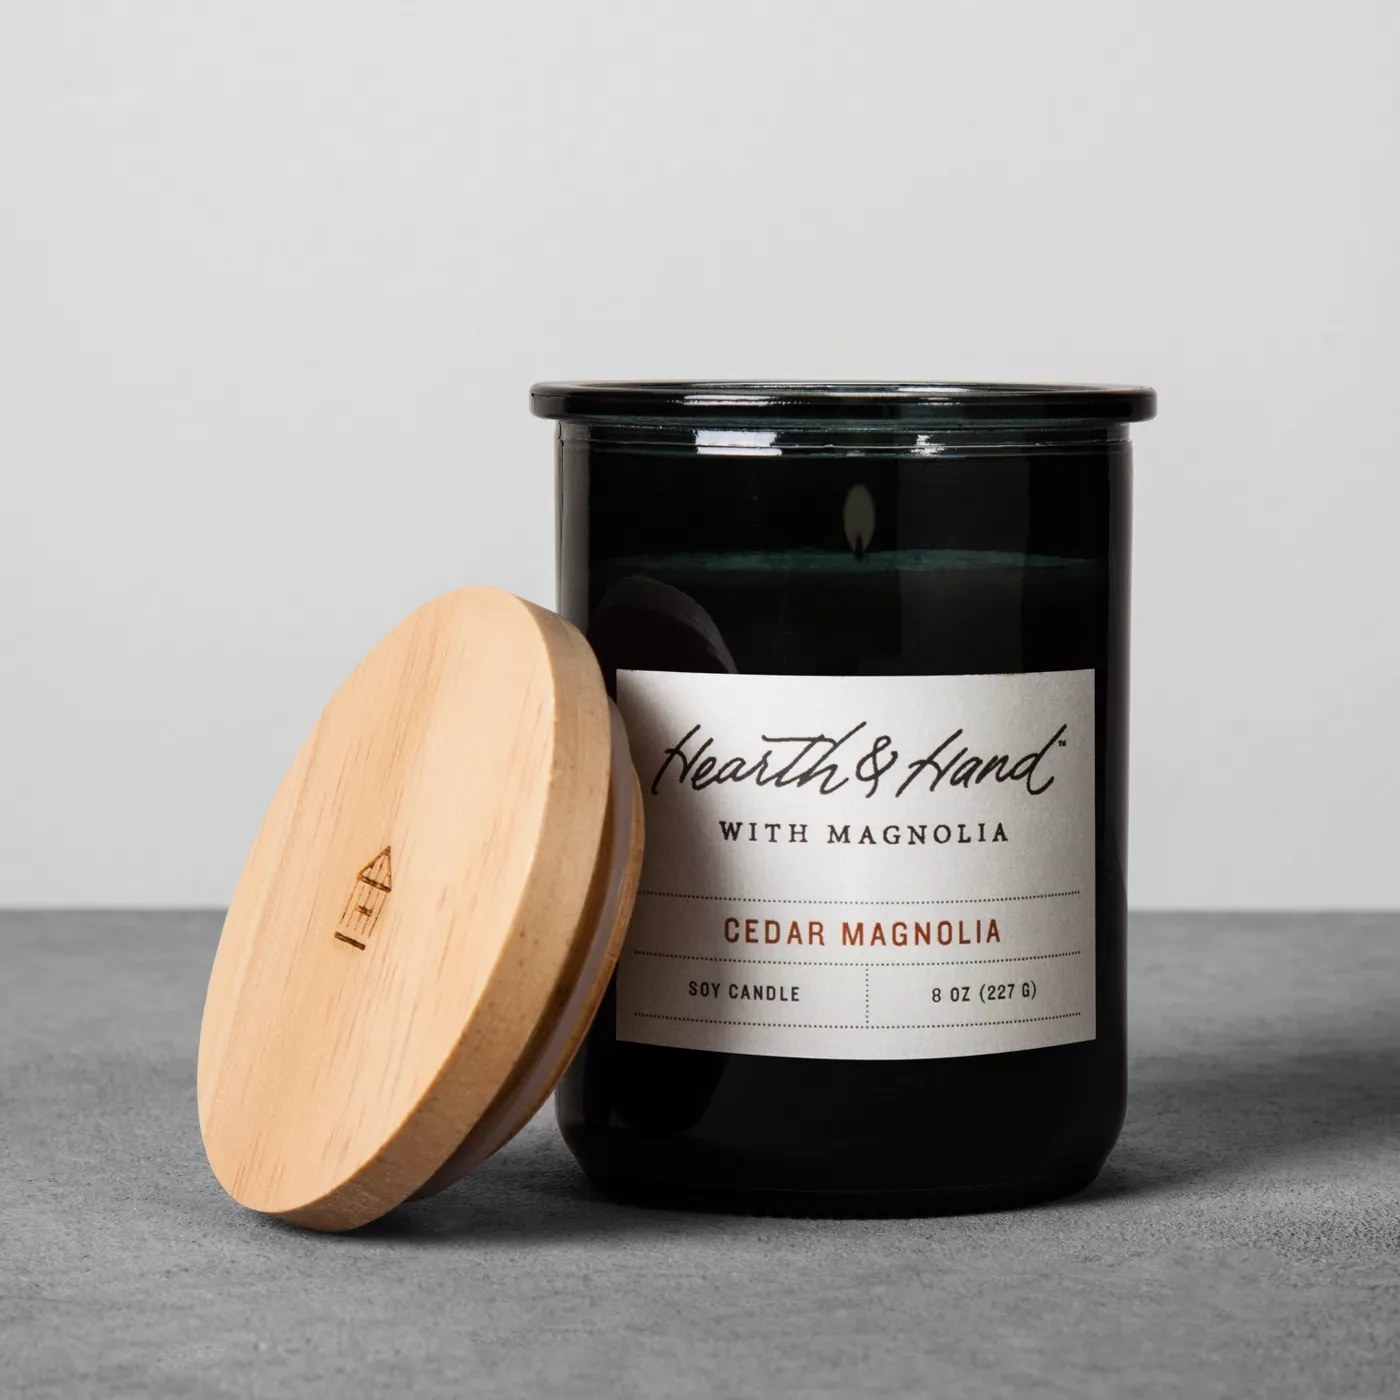 The black candle says &quot;Hearth &amp;amp; Hand&quot; in a script font and has &quot;WITH MAGNOLIA&quot; and &quot;CEDAR MAGNOLIA&quot; below in a serif and non-serif font respectively